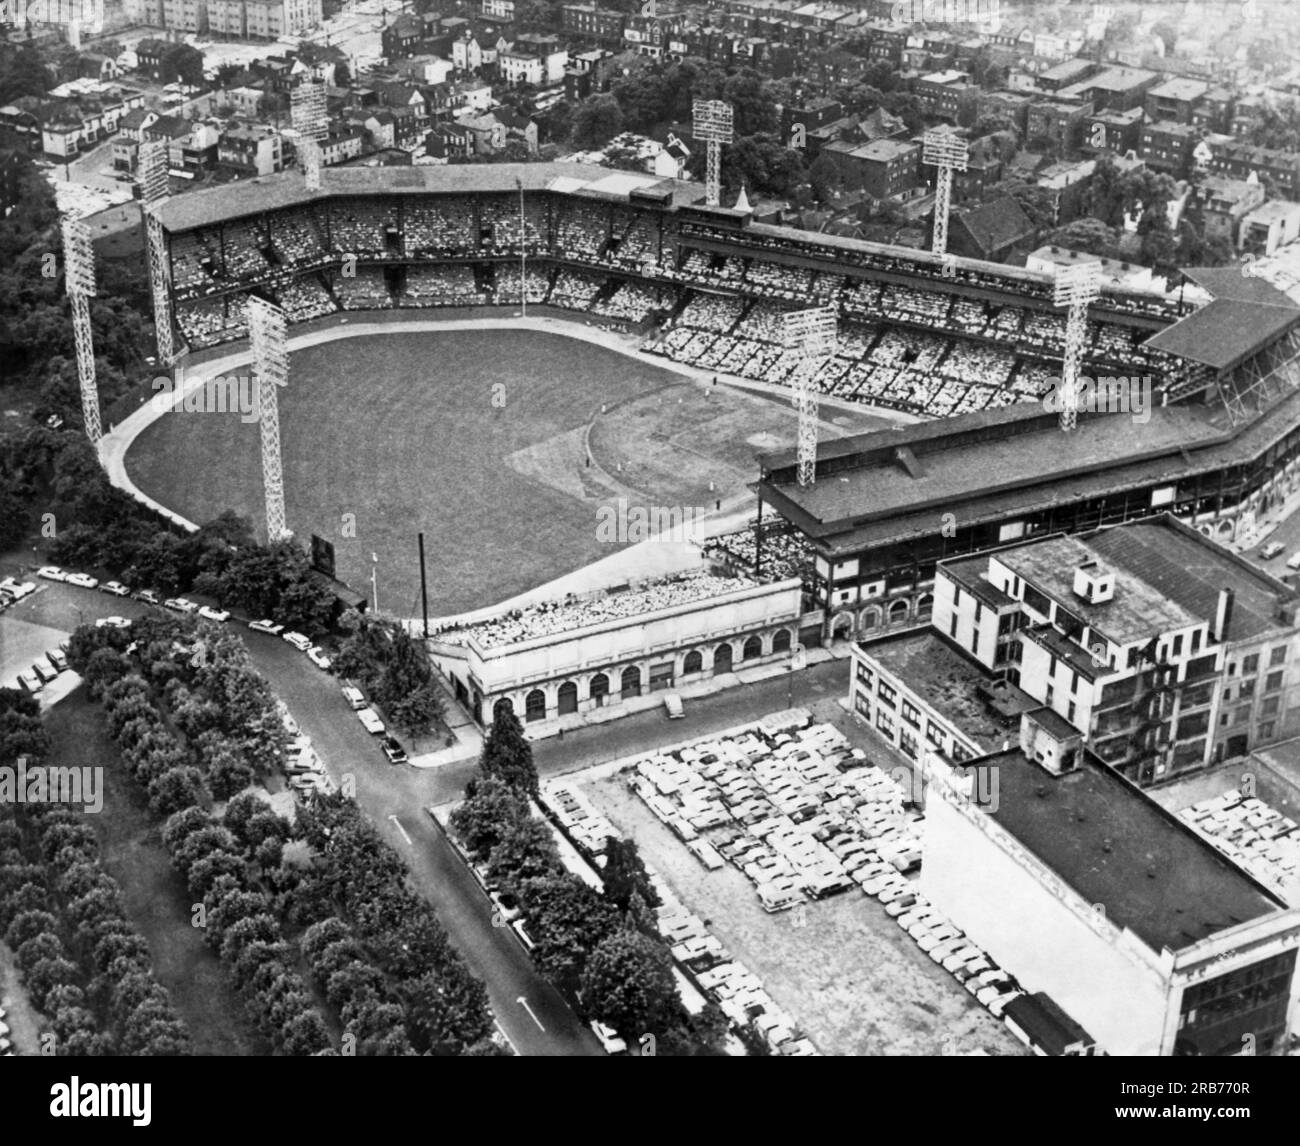 Pittsburgh, Pennsylvania:  September 30, 1960 An aerial view of Forbes Field where baseball's World Series will open next week between the Pittsburgh Pirates and the New York Yankees. Stock Photo